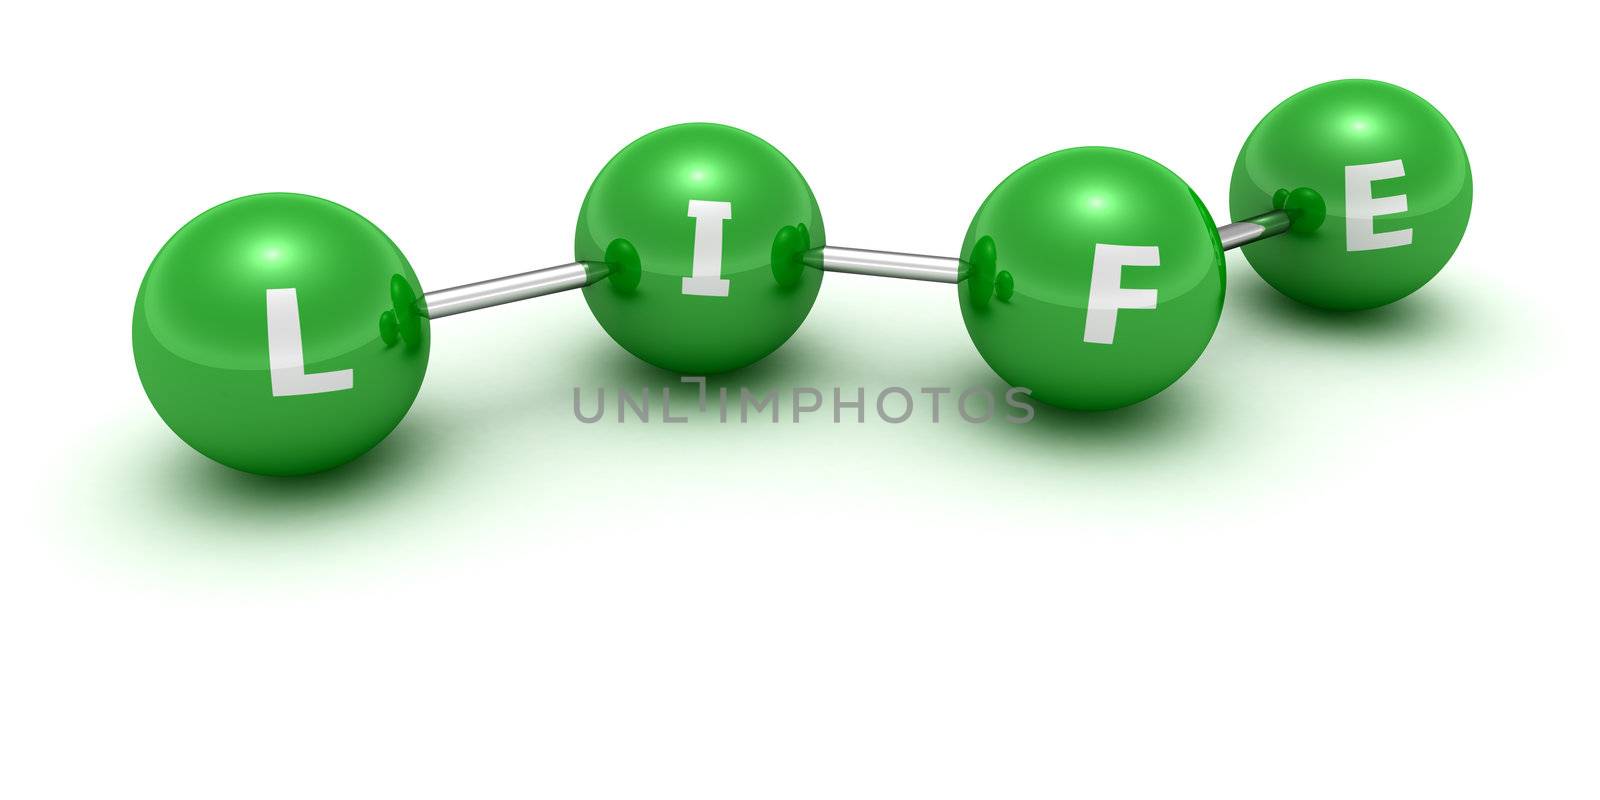 Green balls with word "Life" connected by links